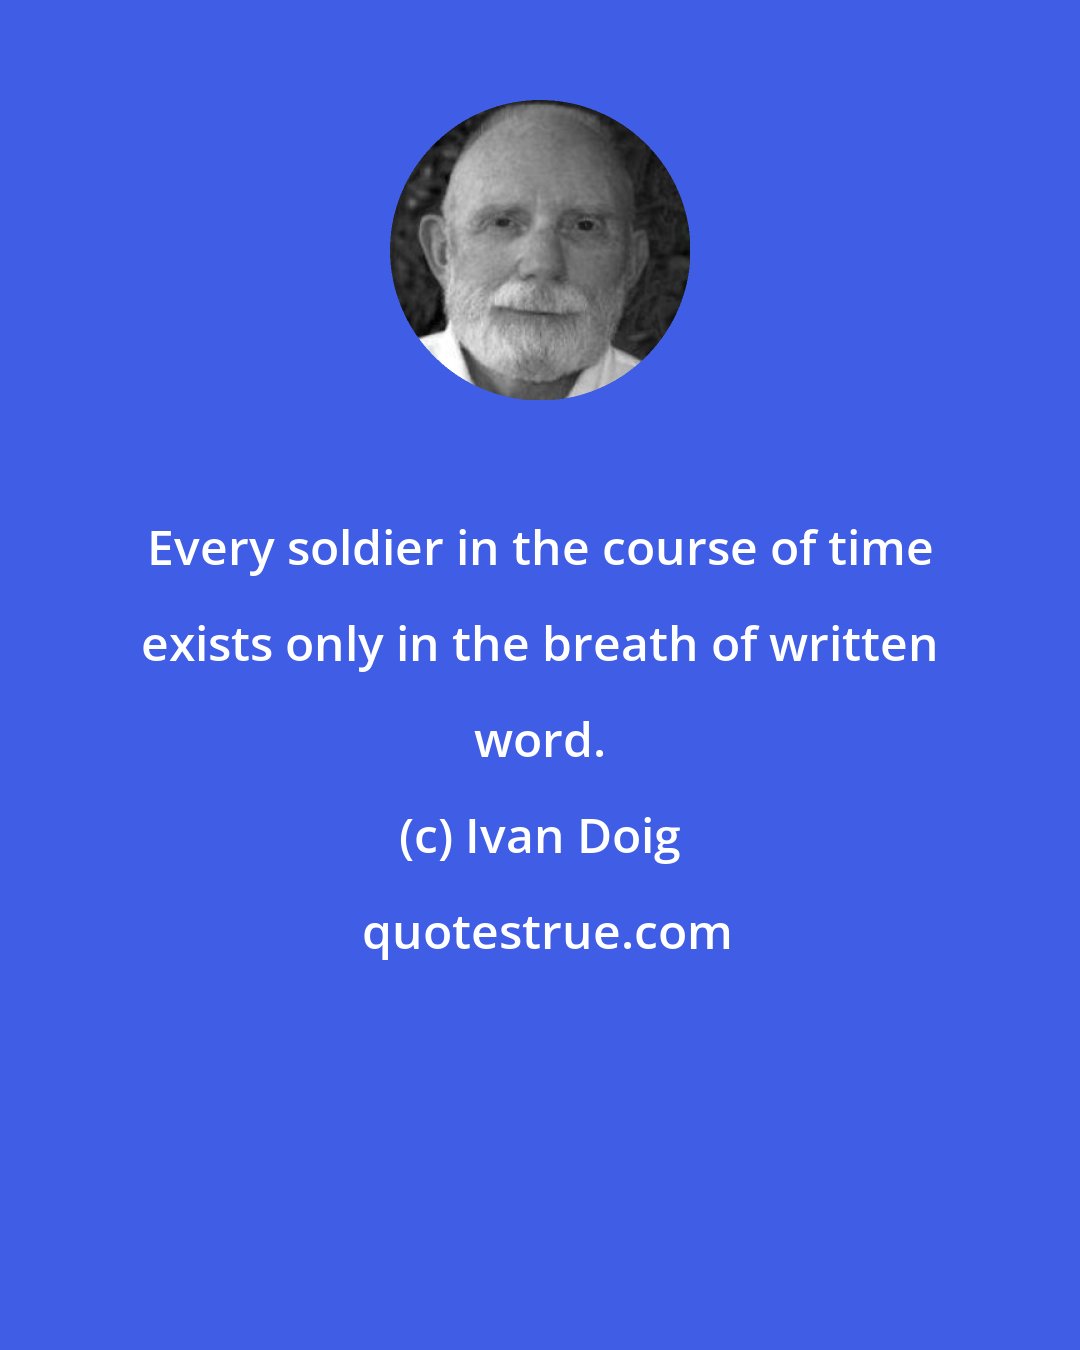 Ivan Doig: Every soldier in the course of time exists only in the breath of written word.